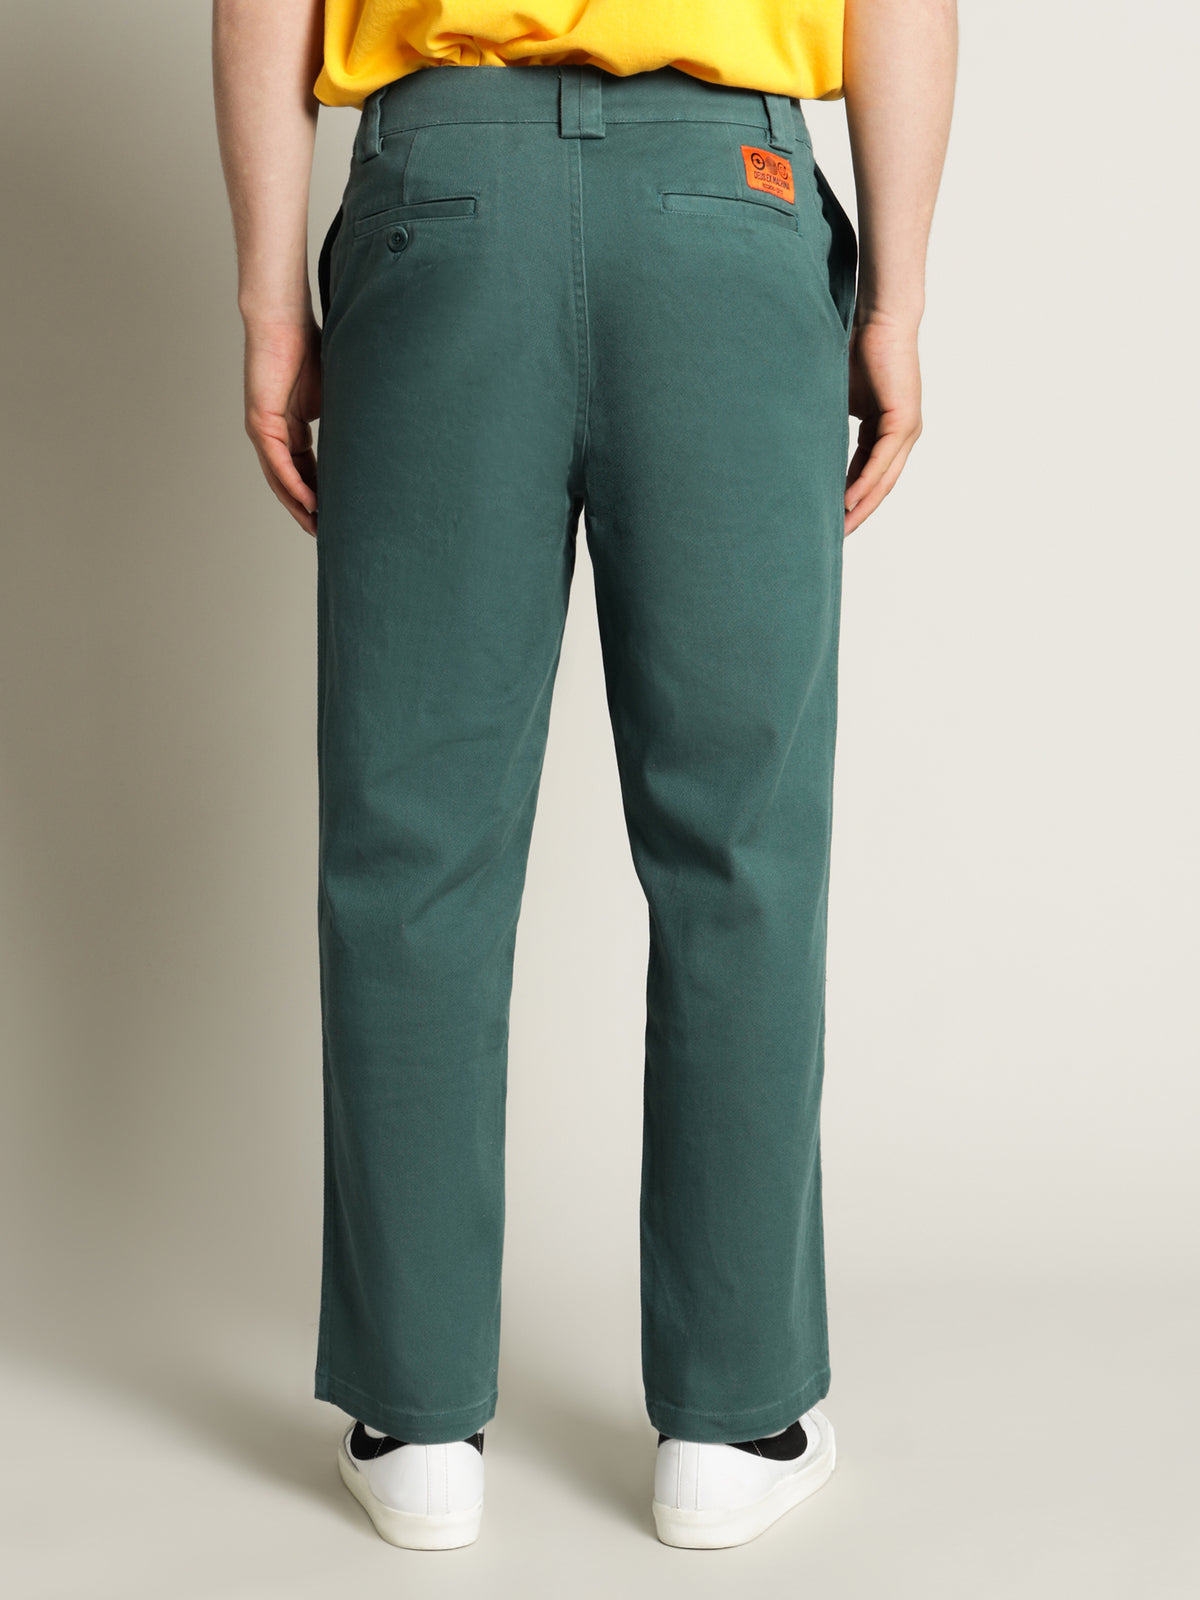 Taylor Records Pants in Teal